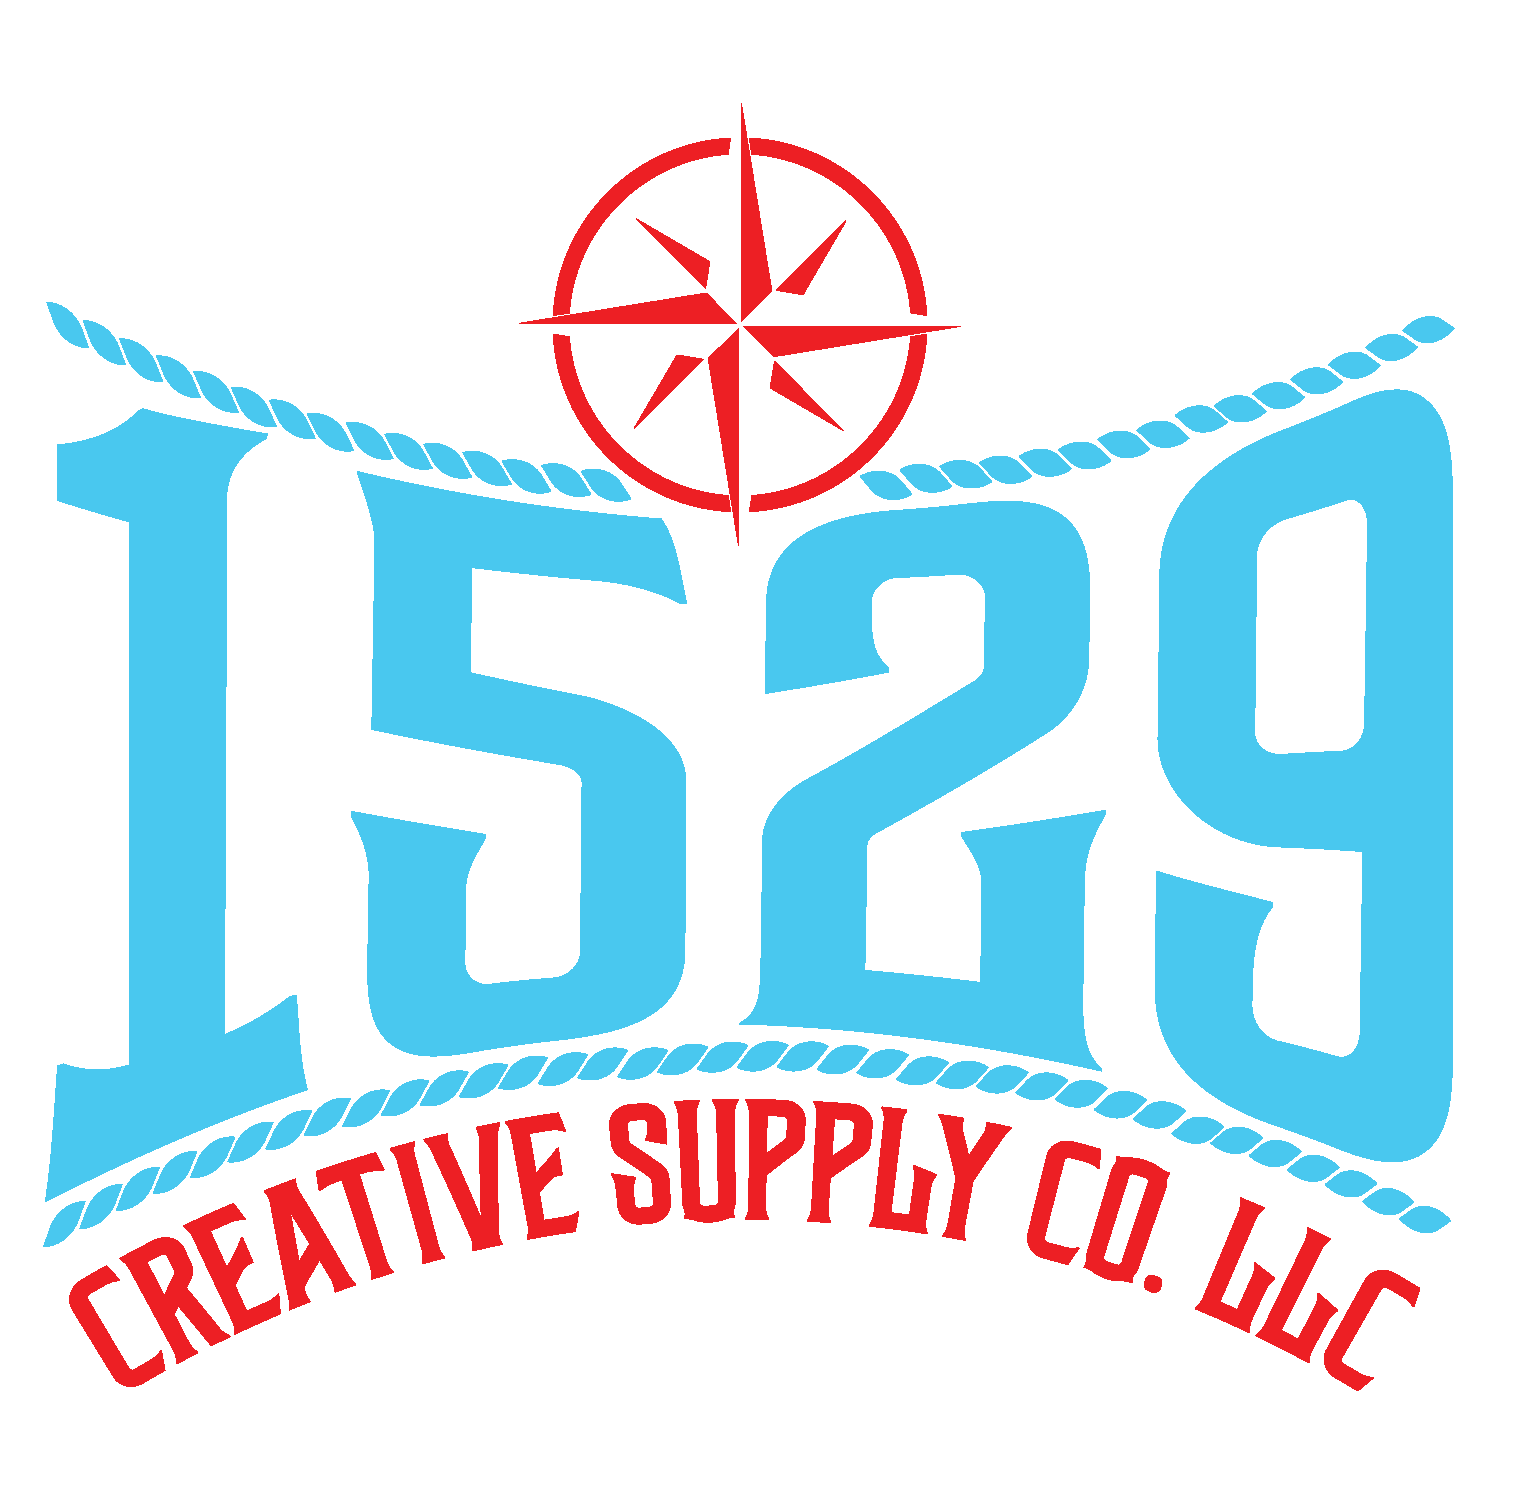 1529 Creative Supply Co Taking Over The World By Storm